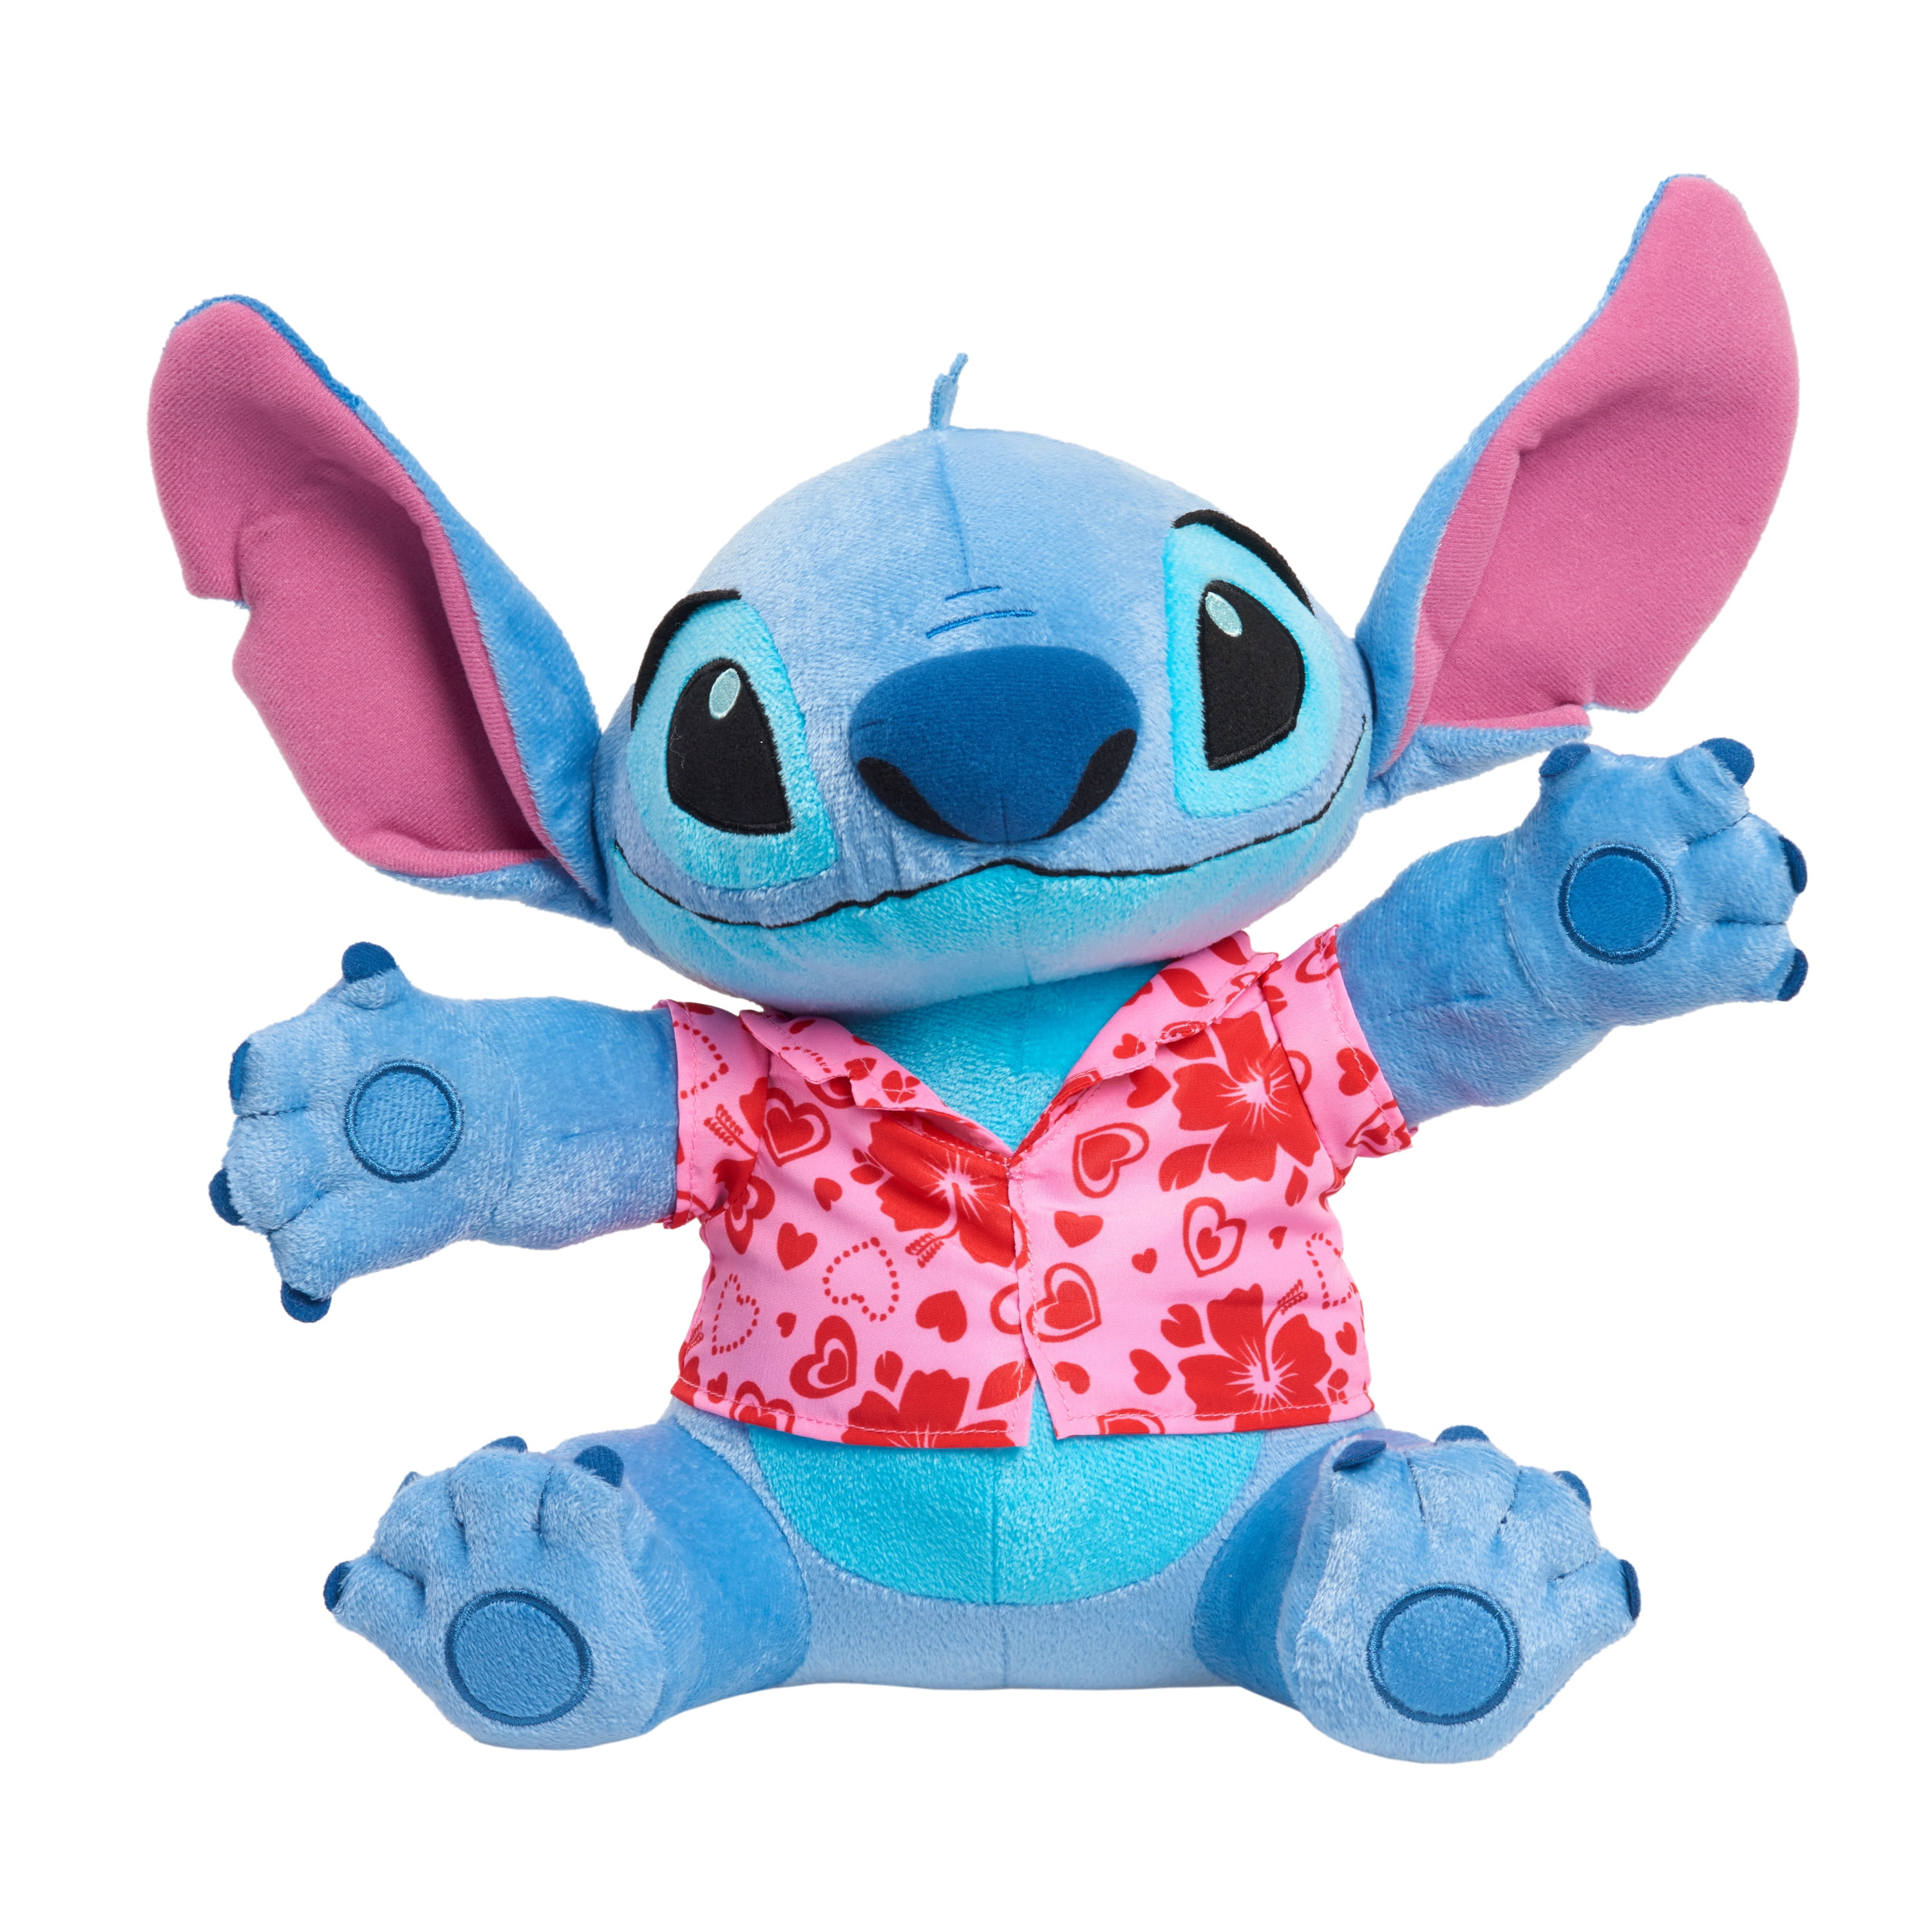 Disney Valentine Stitch Large 11-inch Plush with Shirt, Officially Licensed  Kids Toys for Ages 2 Up, Gifts and Presents 